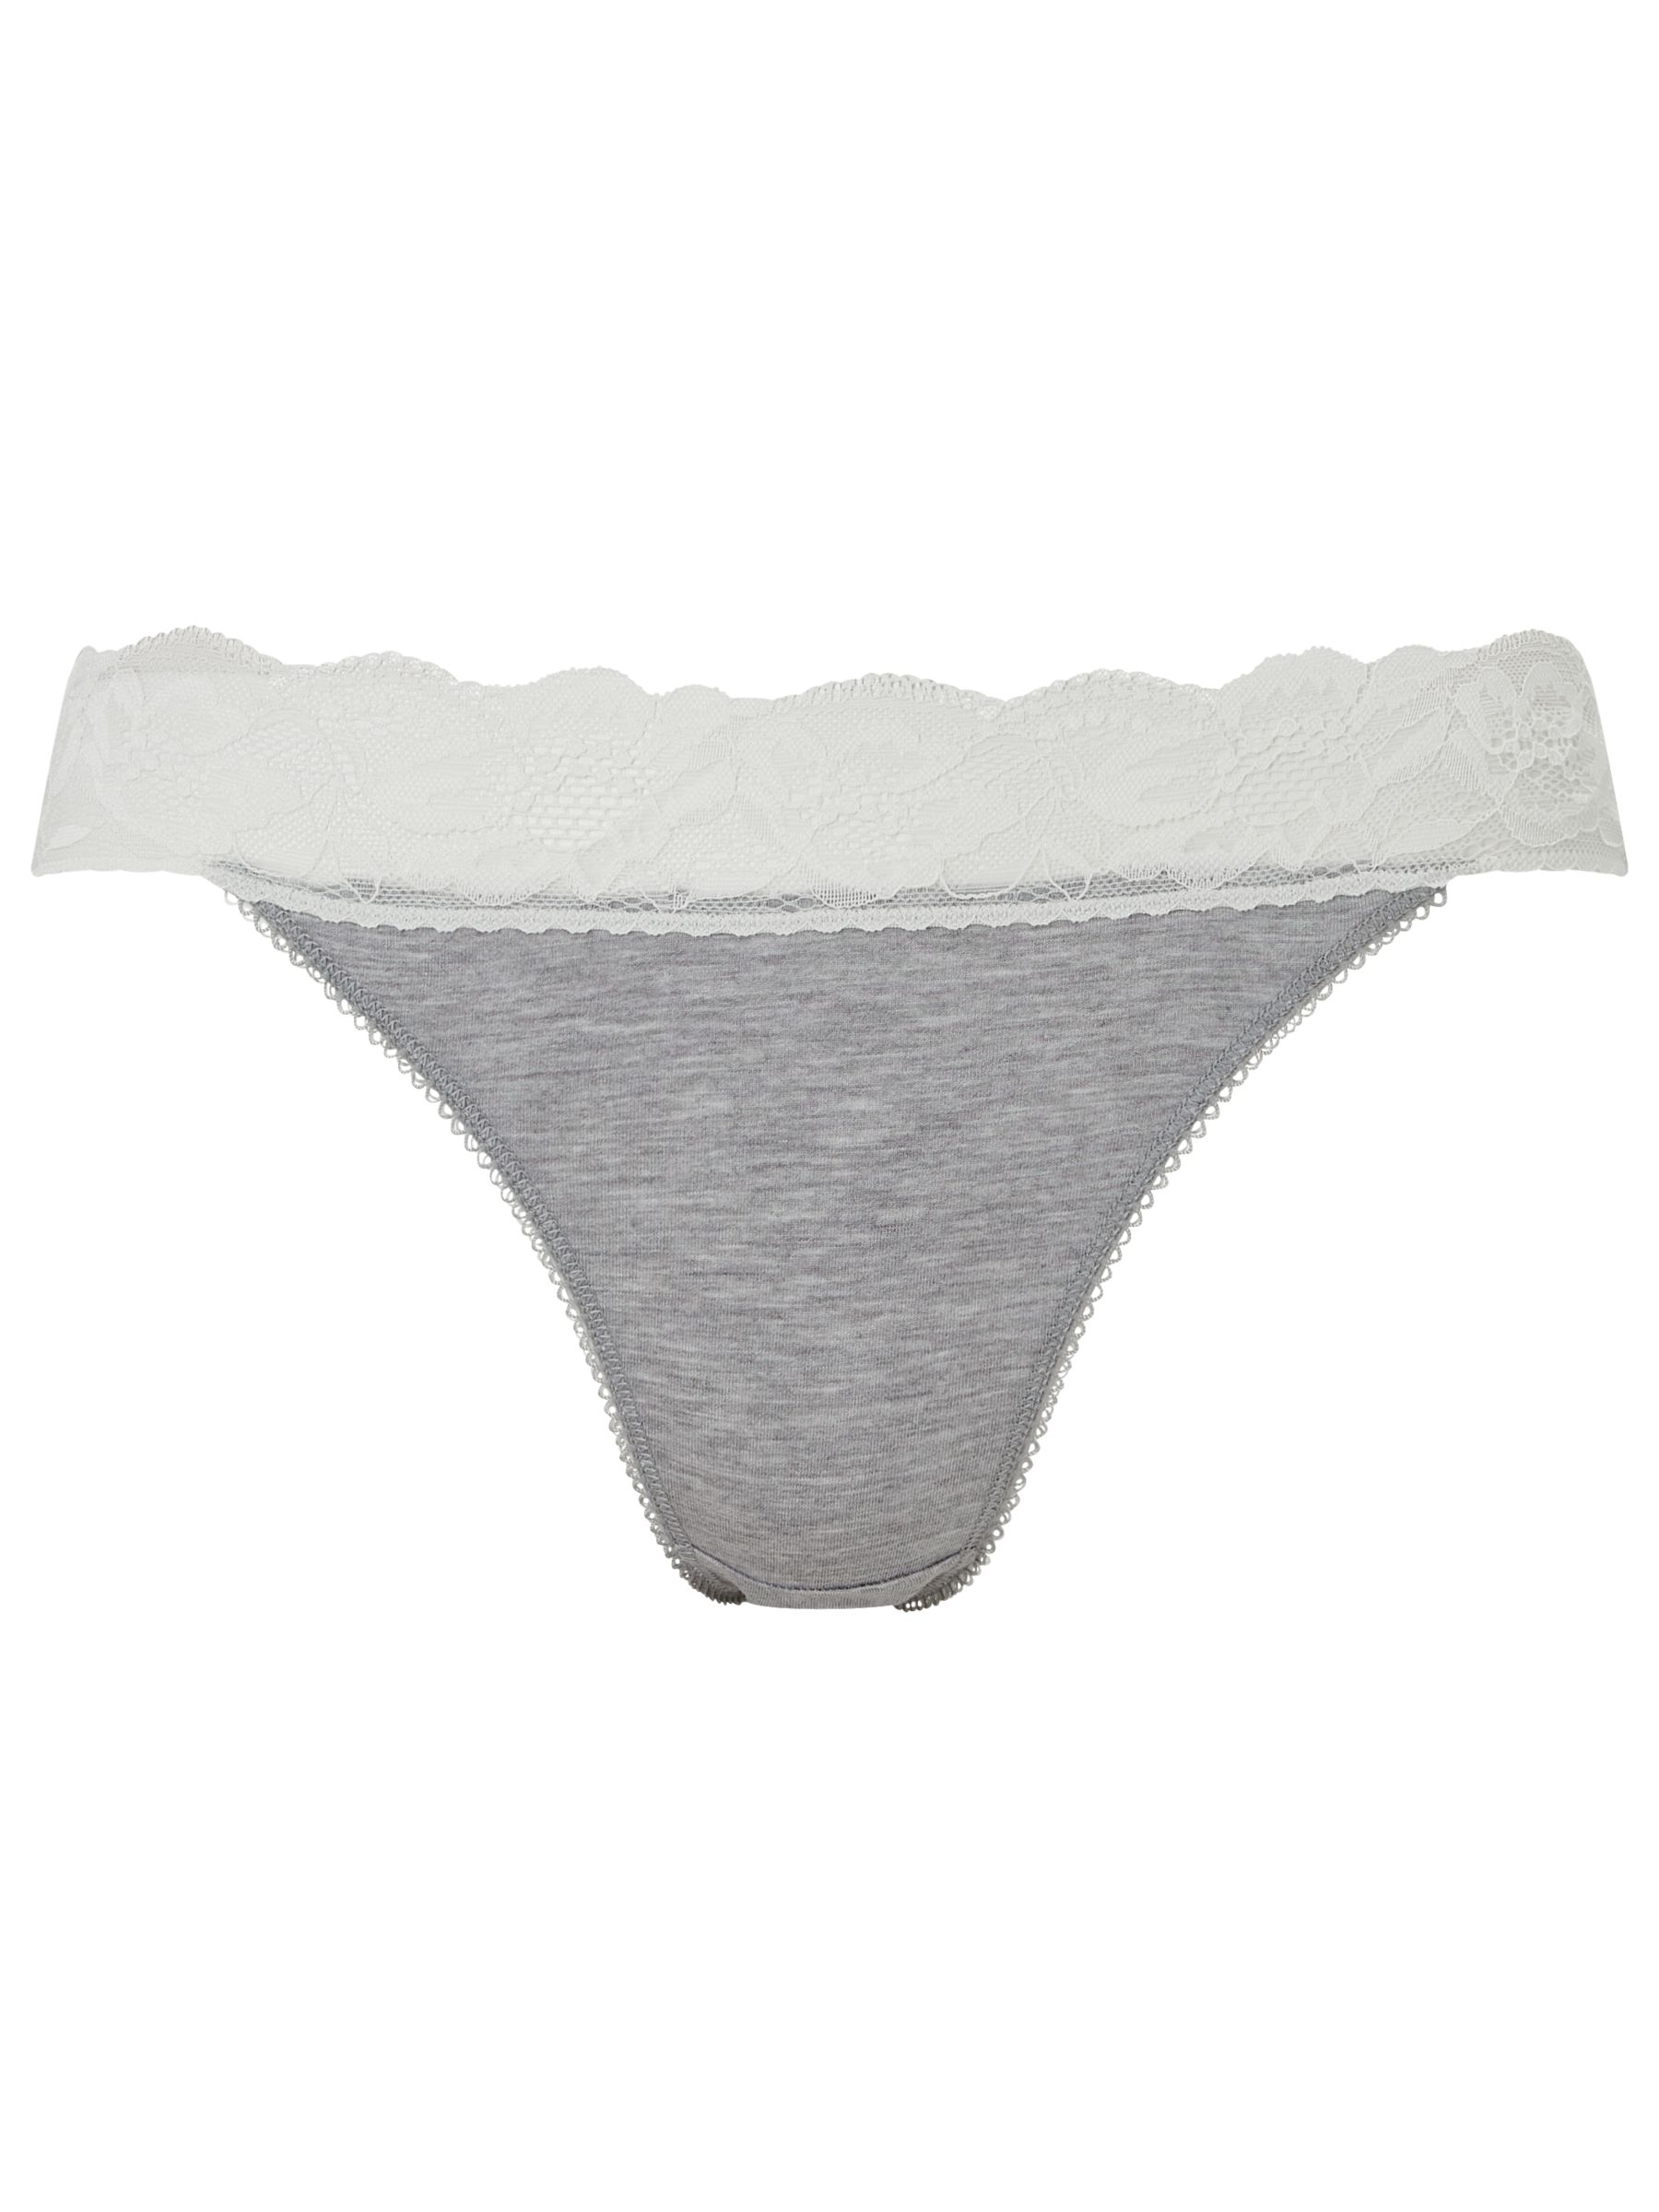 John Lewis ANYDAY Lace Trim Tanga Knickers, Pack of 3, Black/Cream